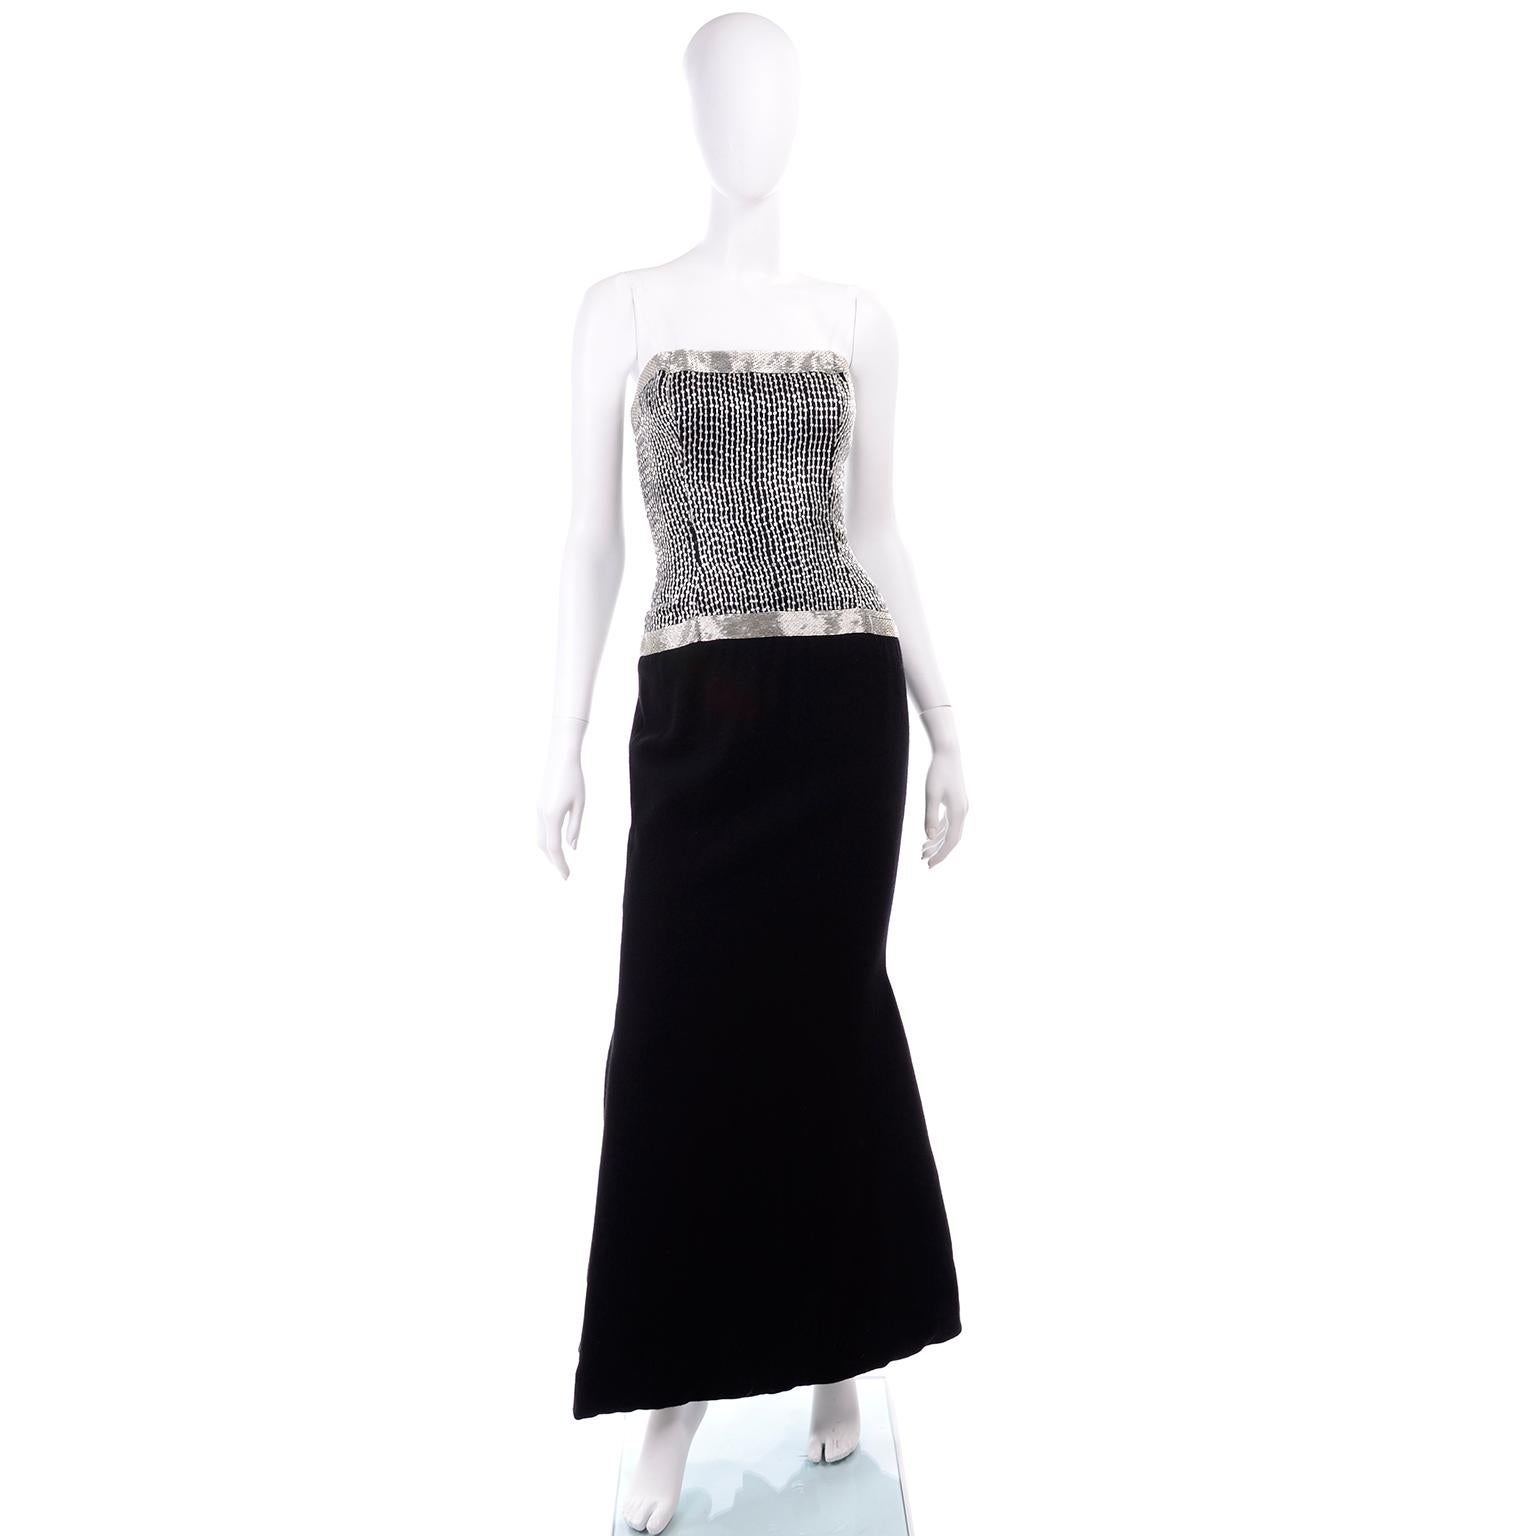 This is a lovely vintage 1980's Ann Lawrence silver beaded Evening gown with a mermaid style black skirt, The dress is made with the highest standards and reminds us of a beautiful couture piece. The strapless bodice is covered in silver bugle beads